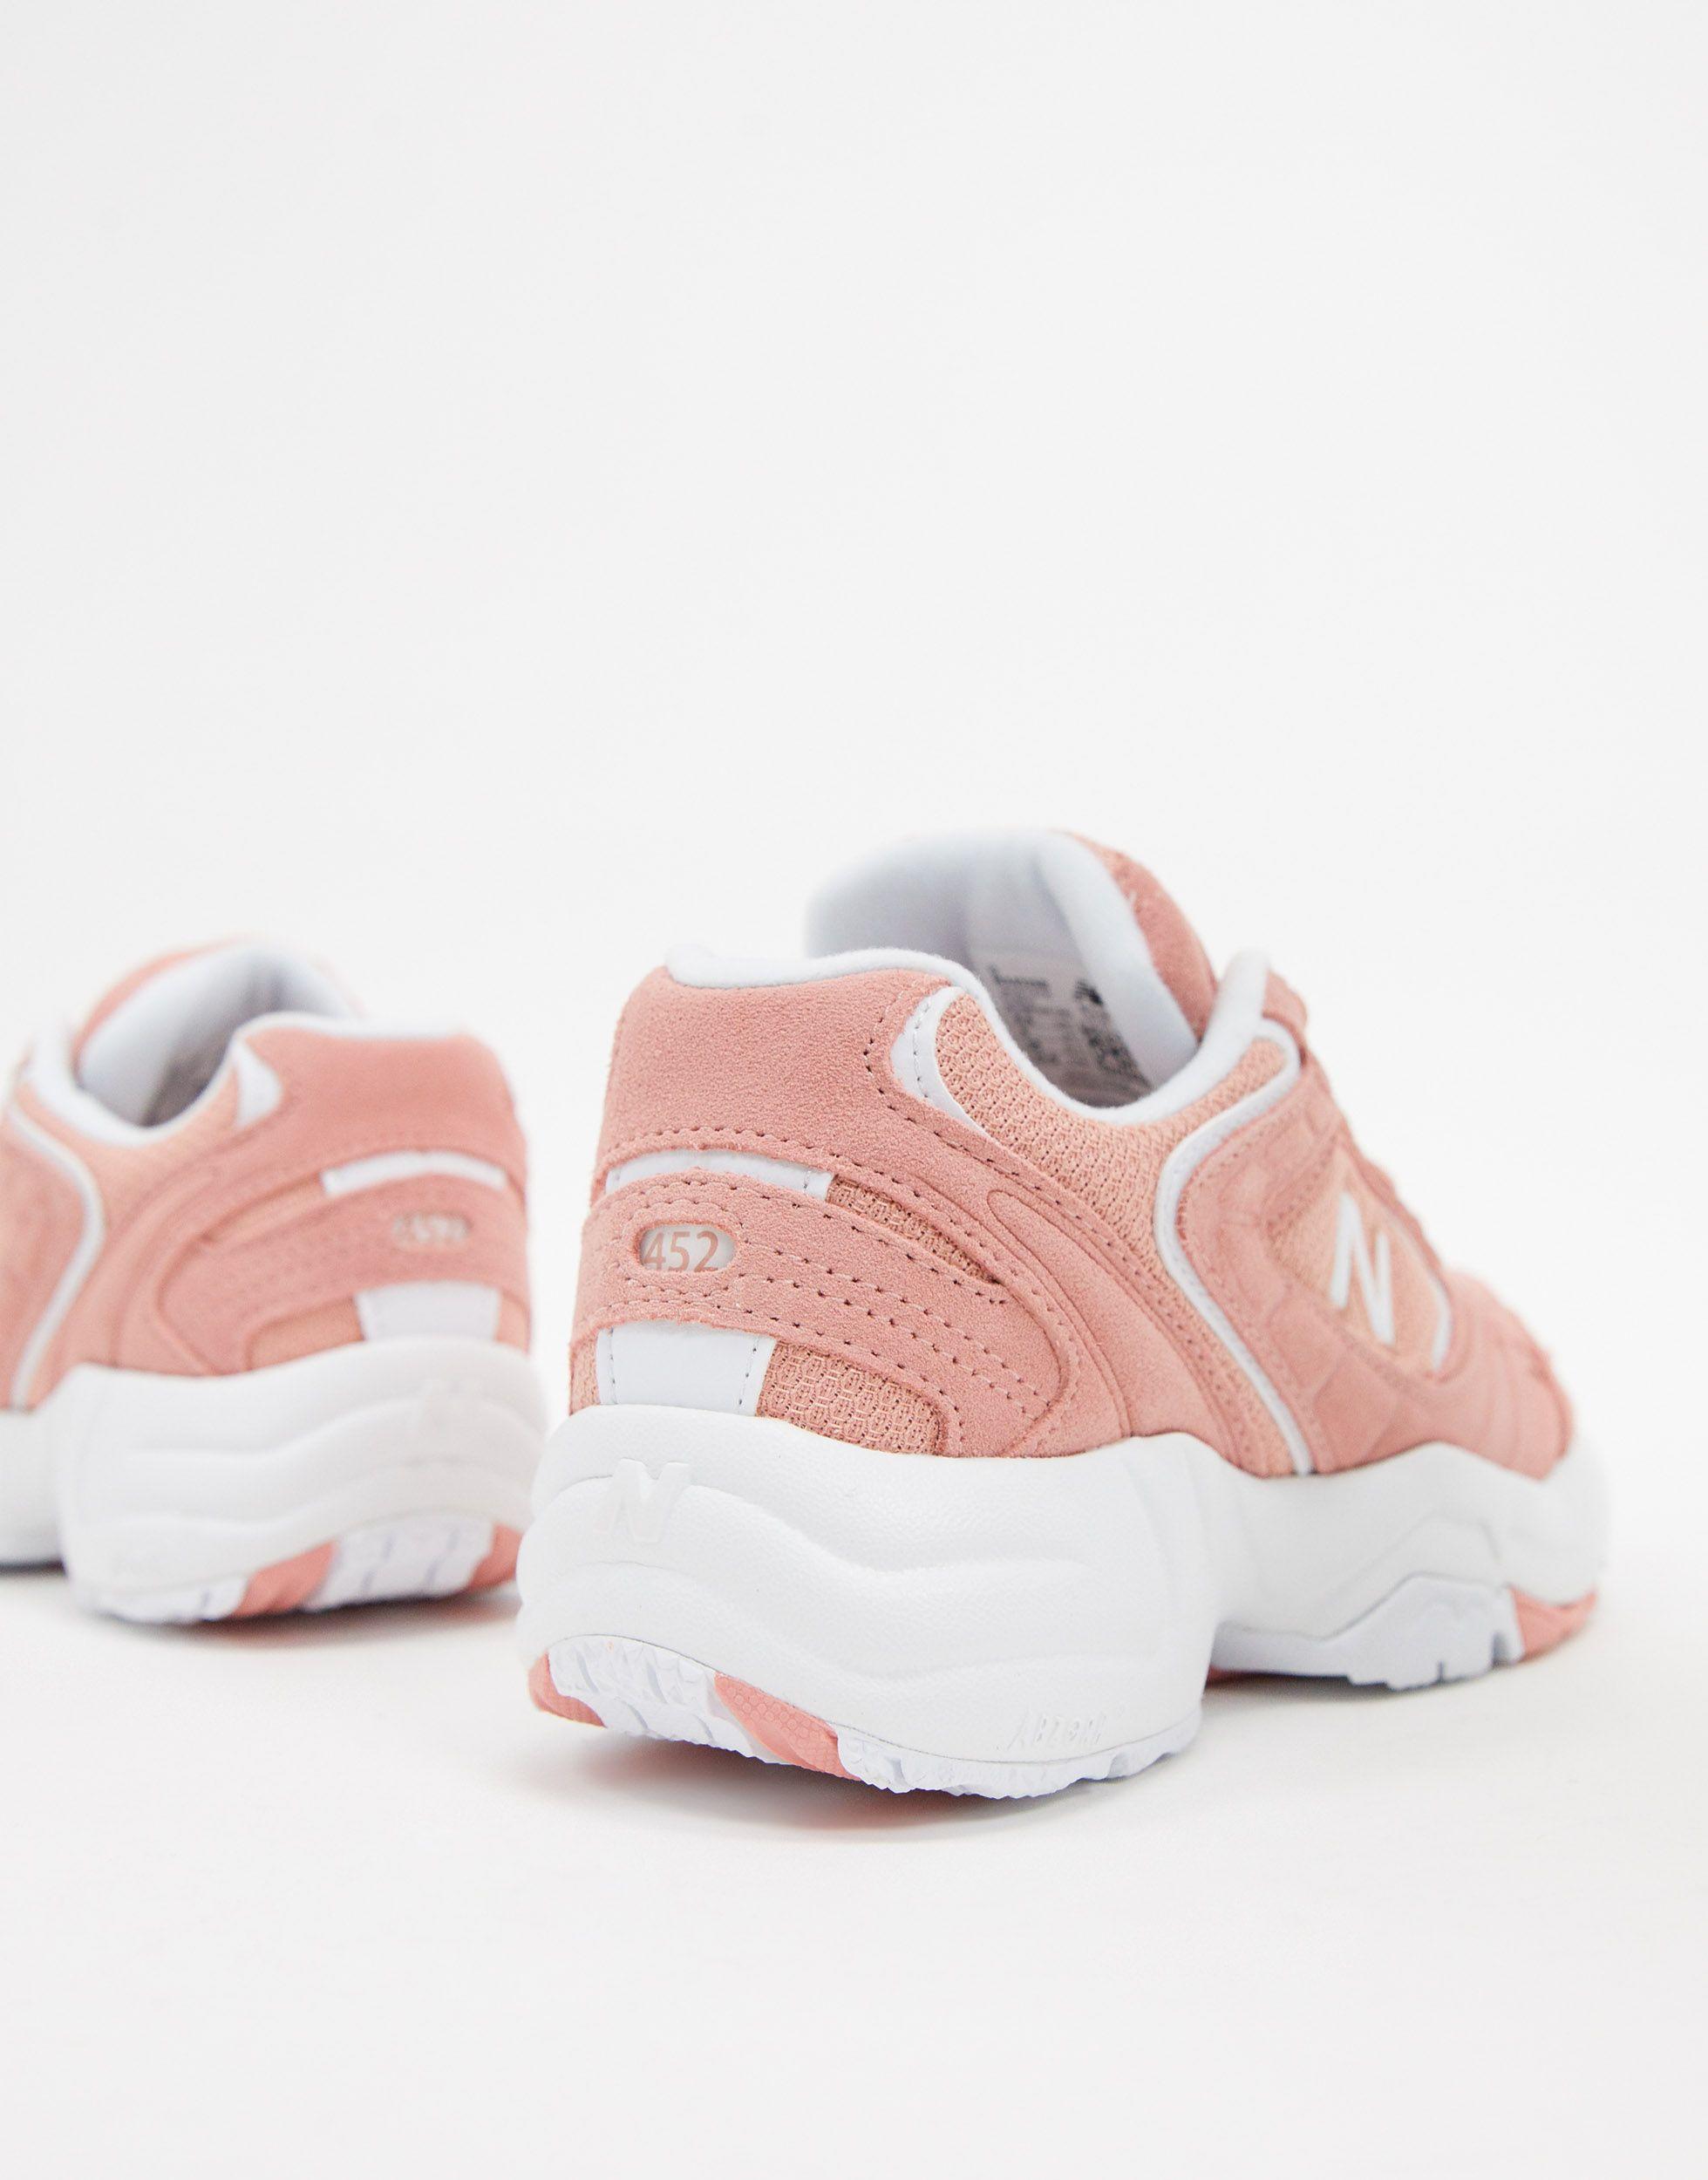 New Balance 452 Chunky Trainers in Pink | Lyst